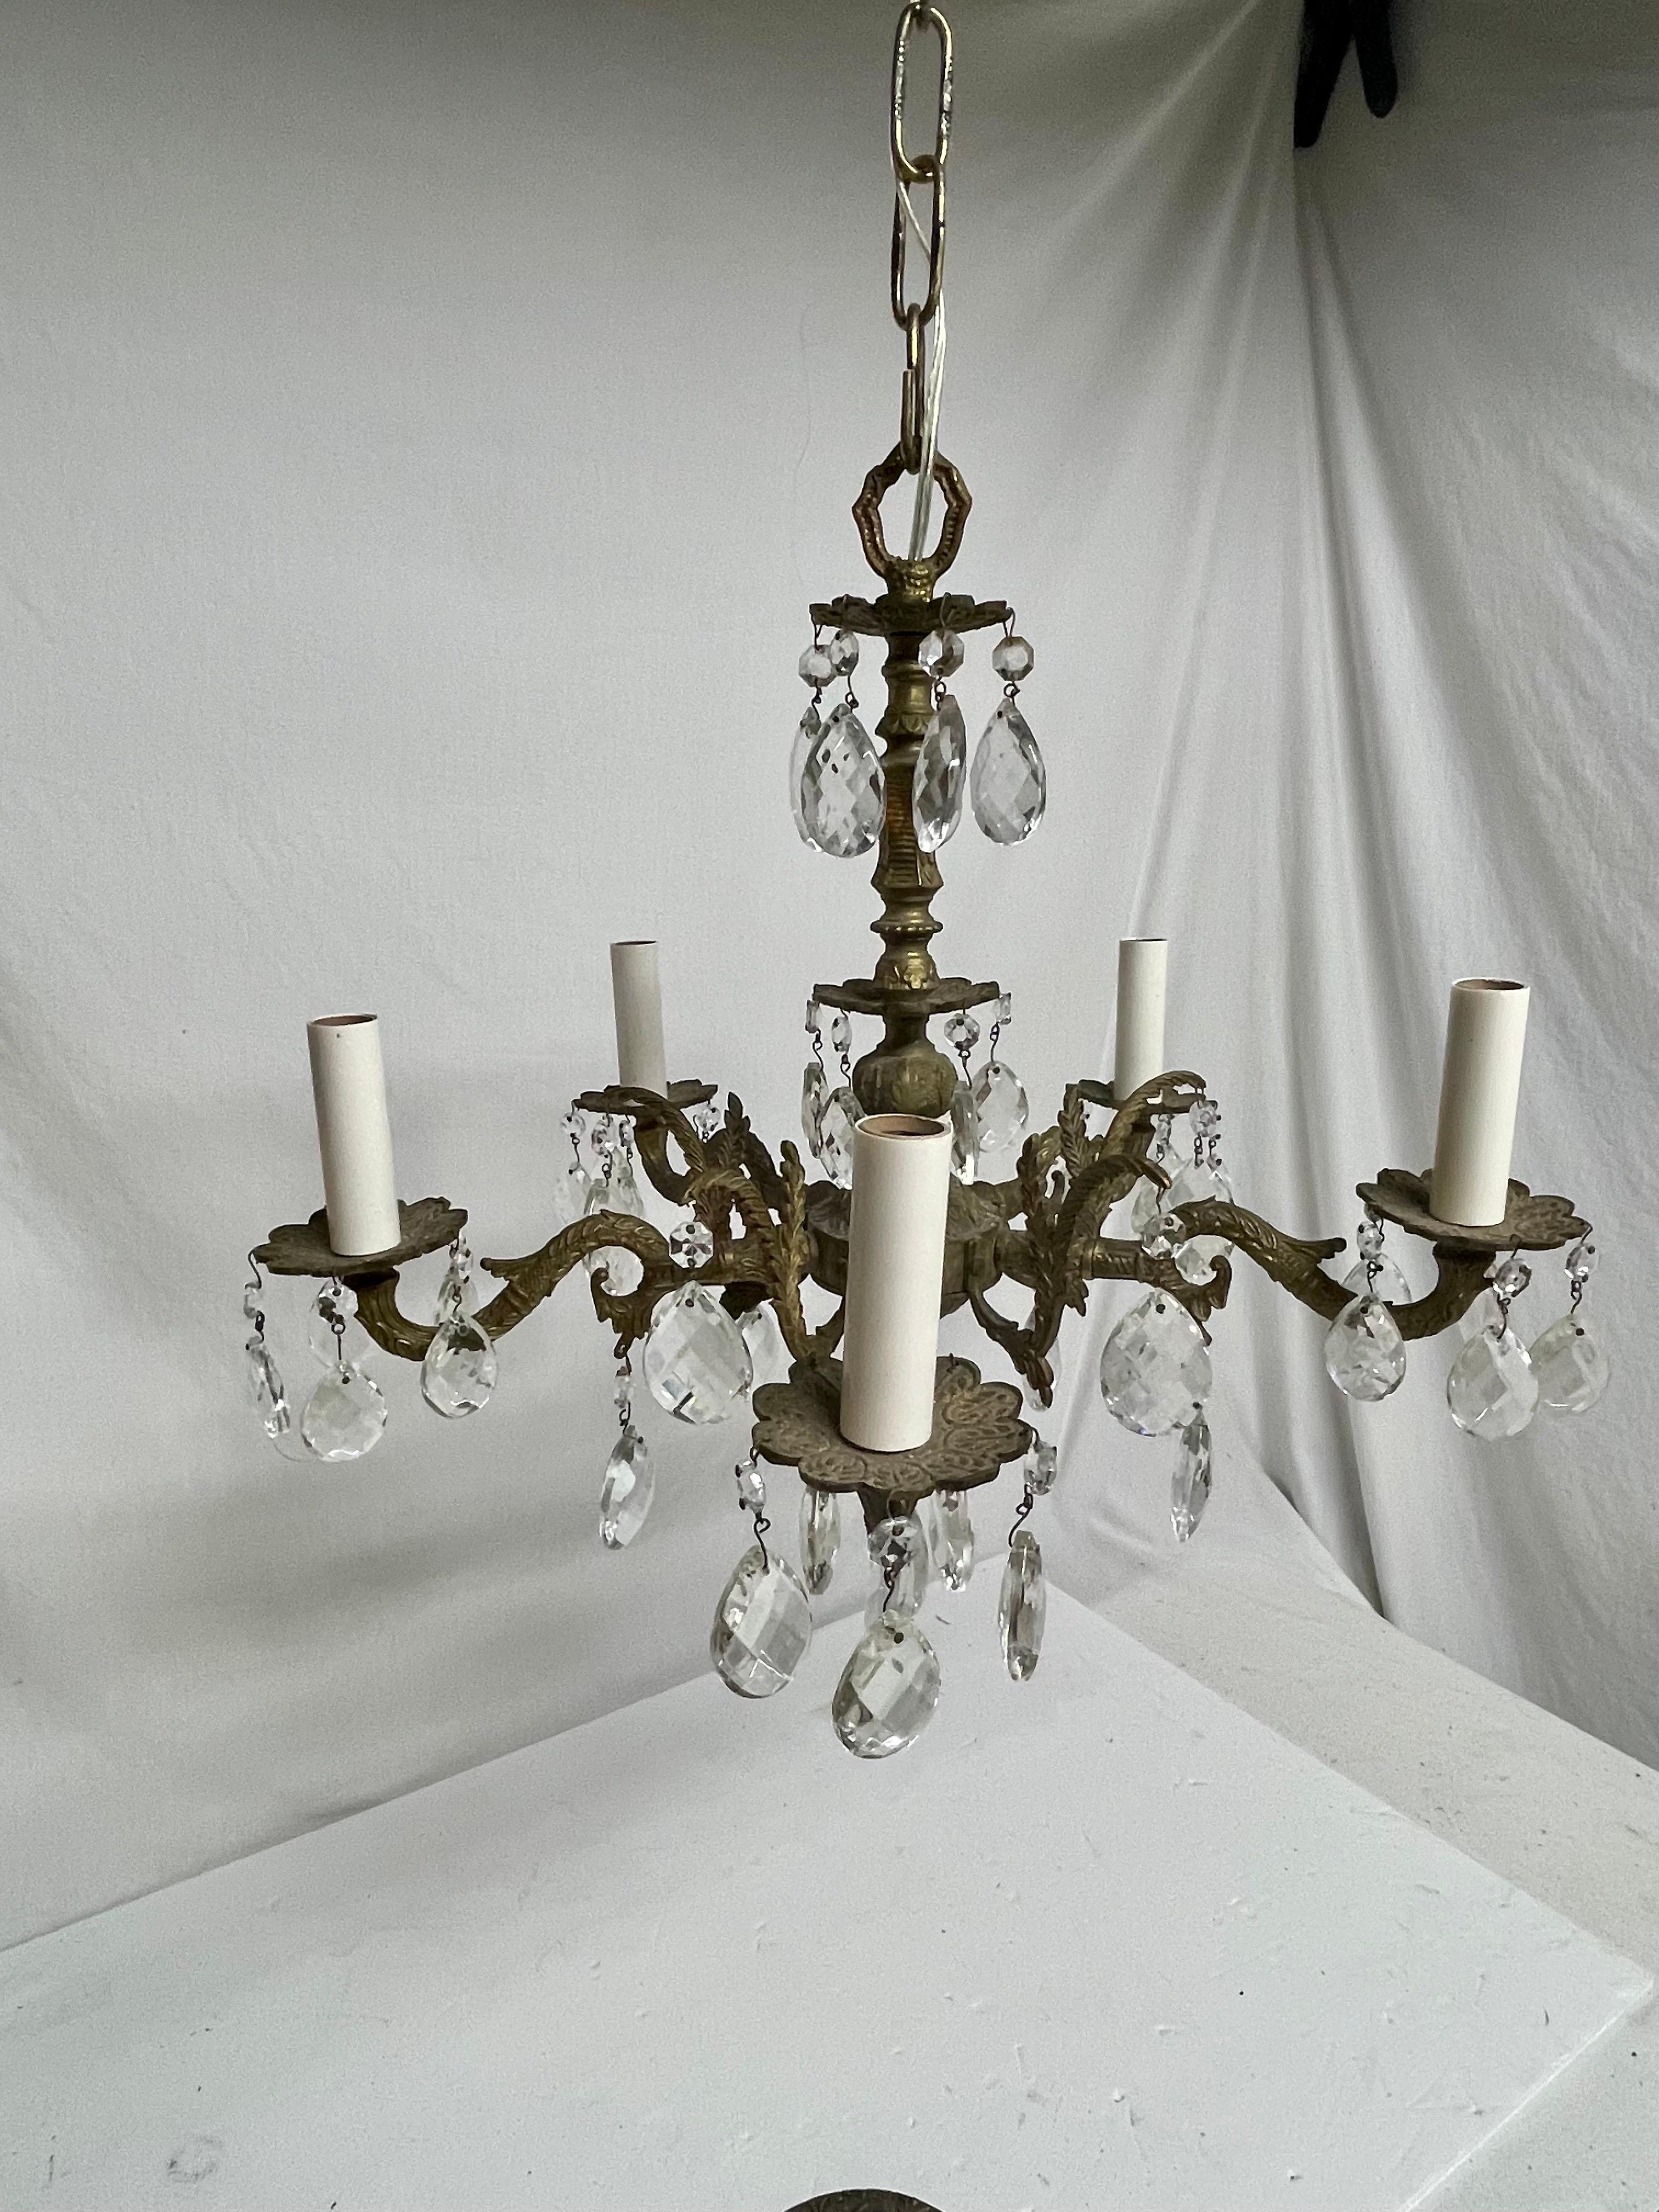 Brass and Crystal French Style Chandelier featuring two sizes of shimmering crystals mounted on a detailed brass frame. Rewired with clear wire. Five arms with candelabra sockets. New cream colored candle covers. Chandelier measures 17